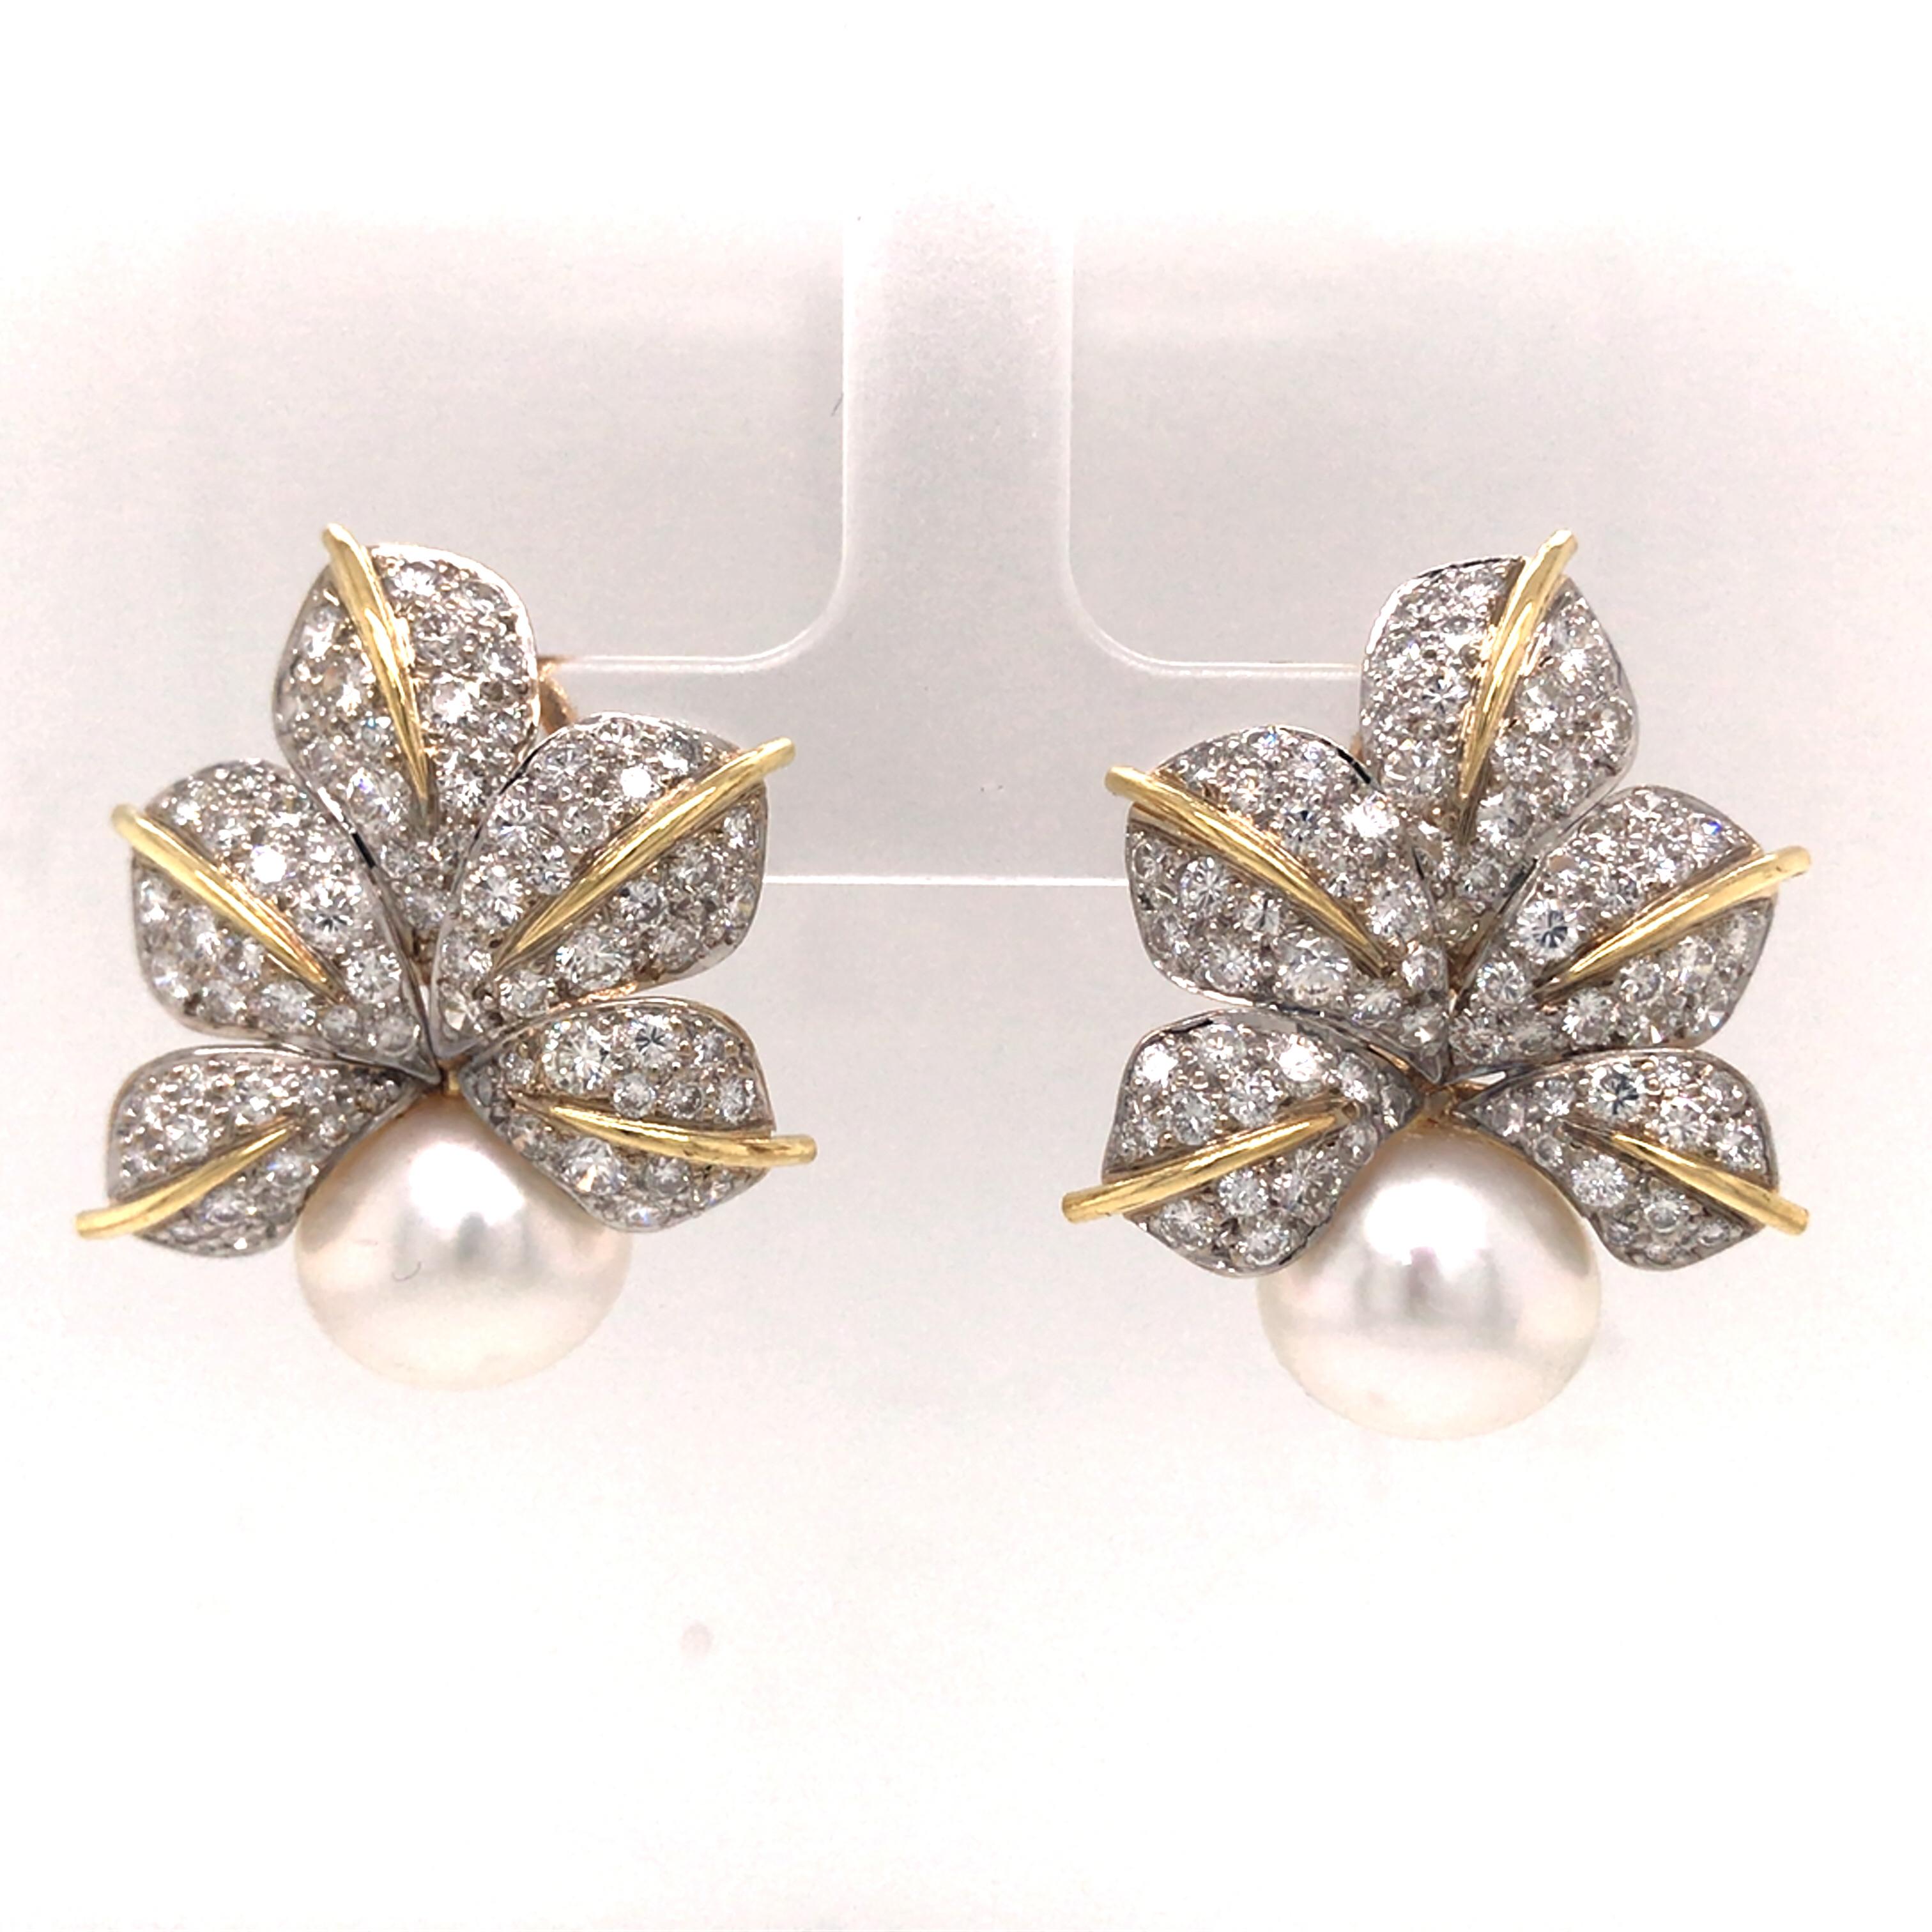 Diamond Pave Leaf and Pearl Earrings in 18K Two-Tone Gold.  Round Brilliant Cut Diamonds weighing 5.43 carat total weight, G-H in color and VS in clarity are expertly set with (2) 12mm White Round Pearls.  The Earrings measure 1 1/4 inch in length